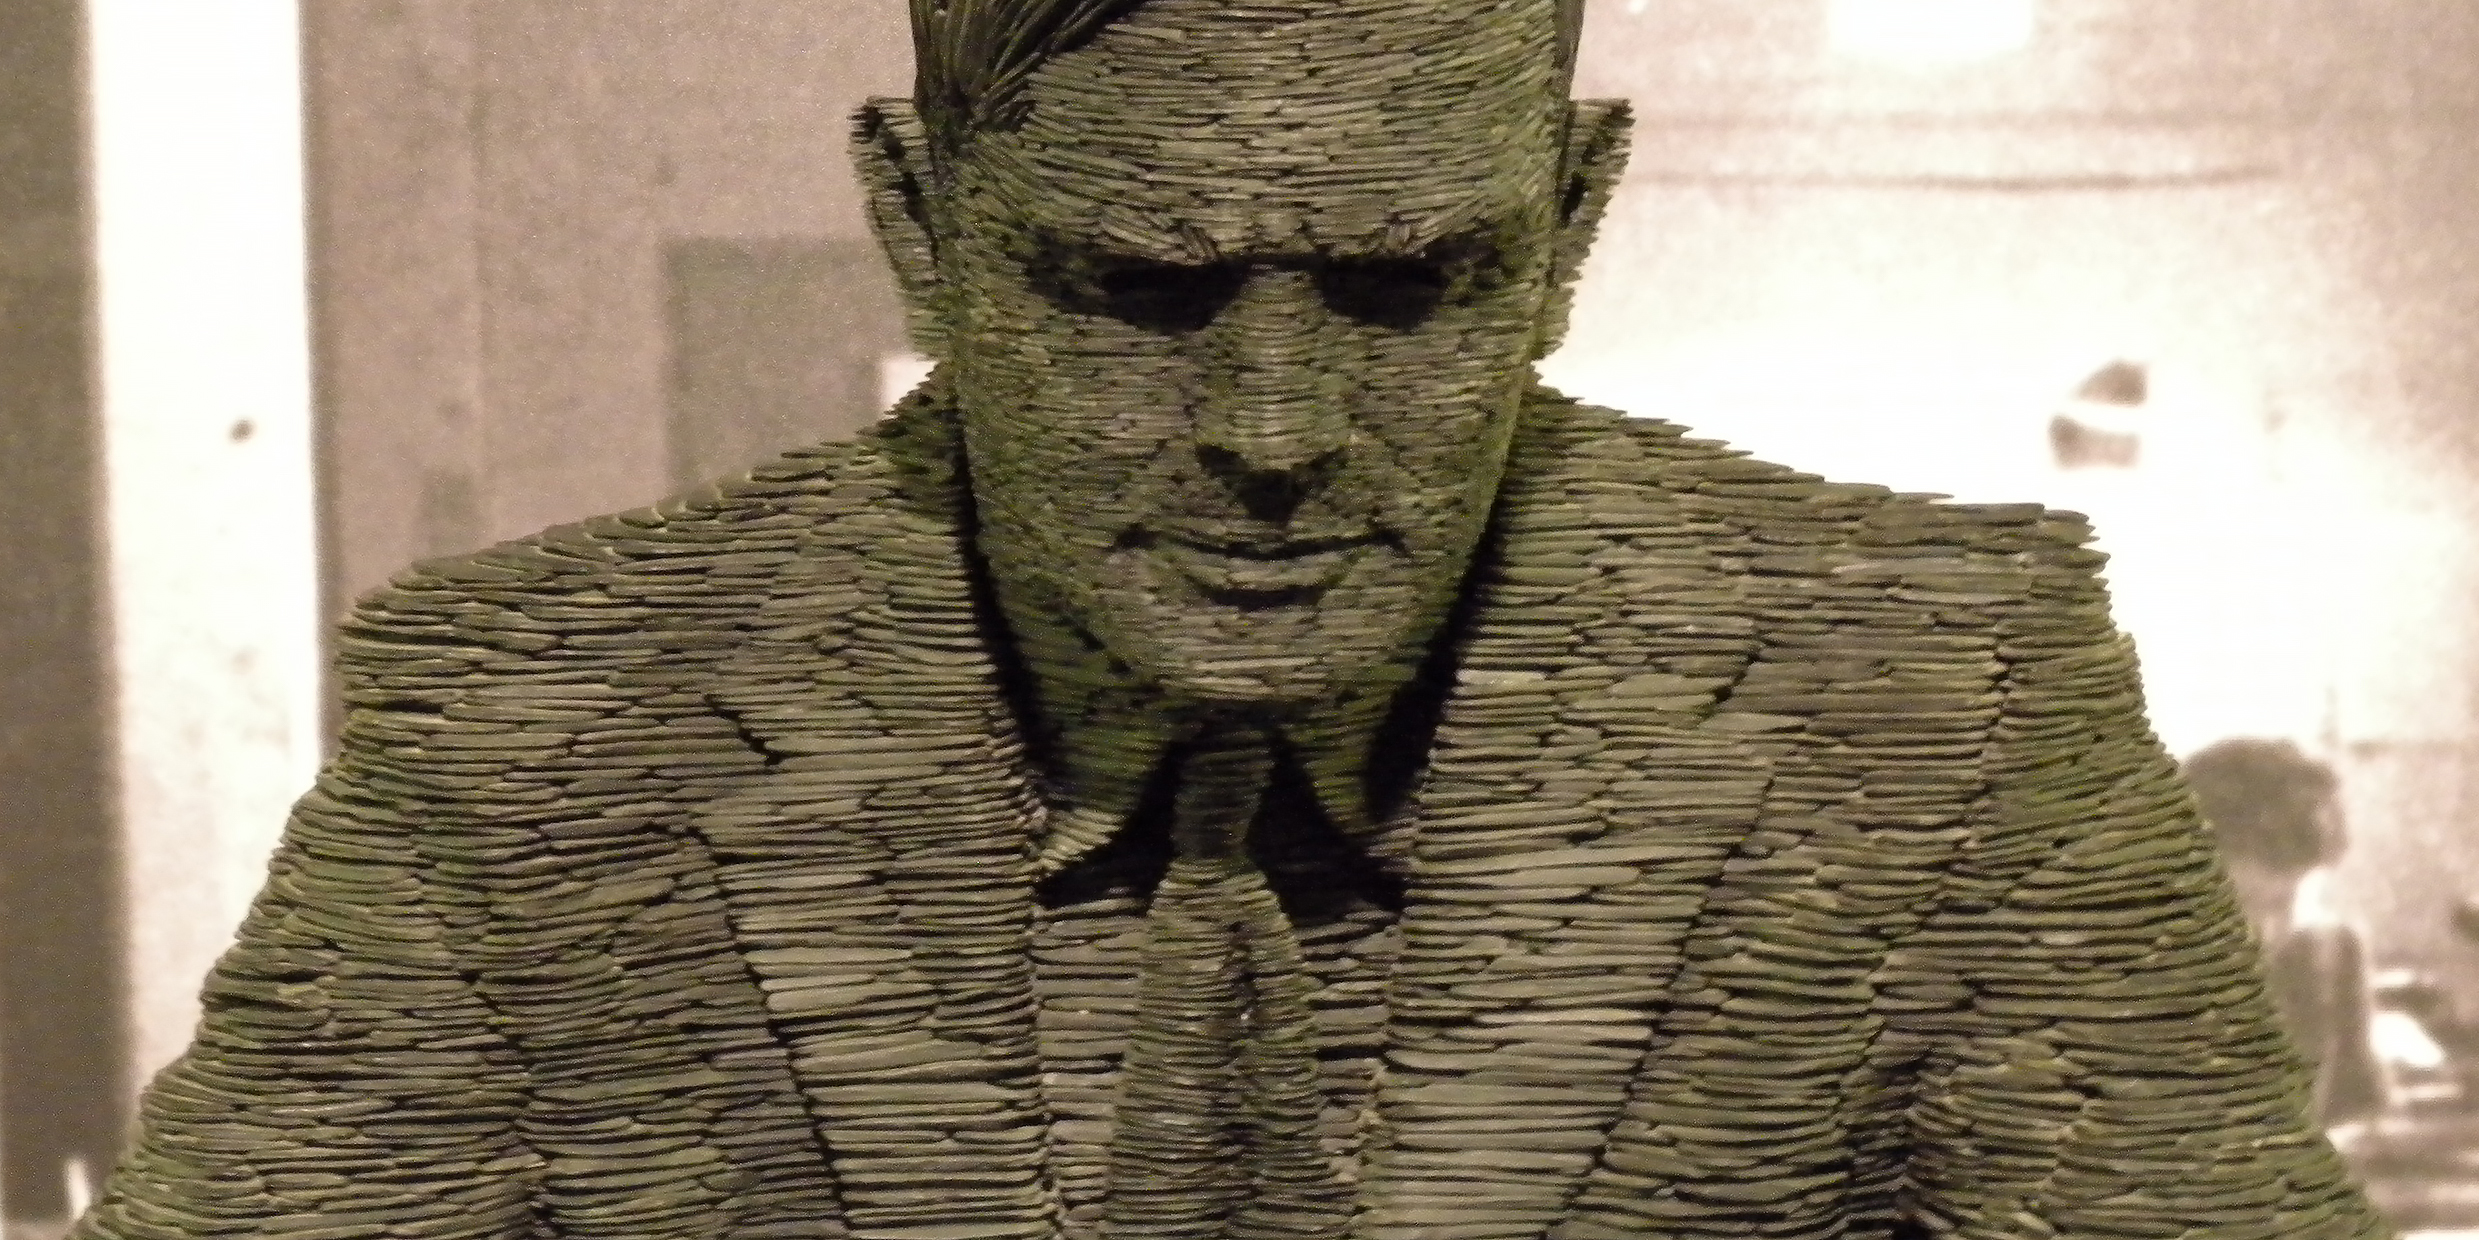 Image of a sculpture of Alan Turing